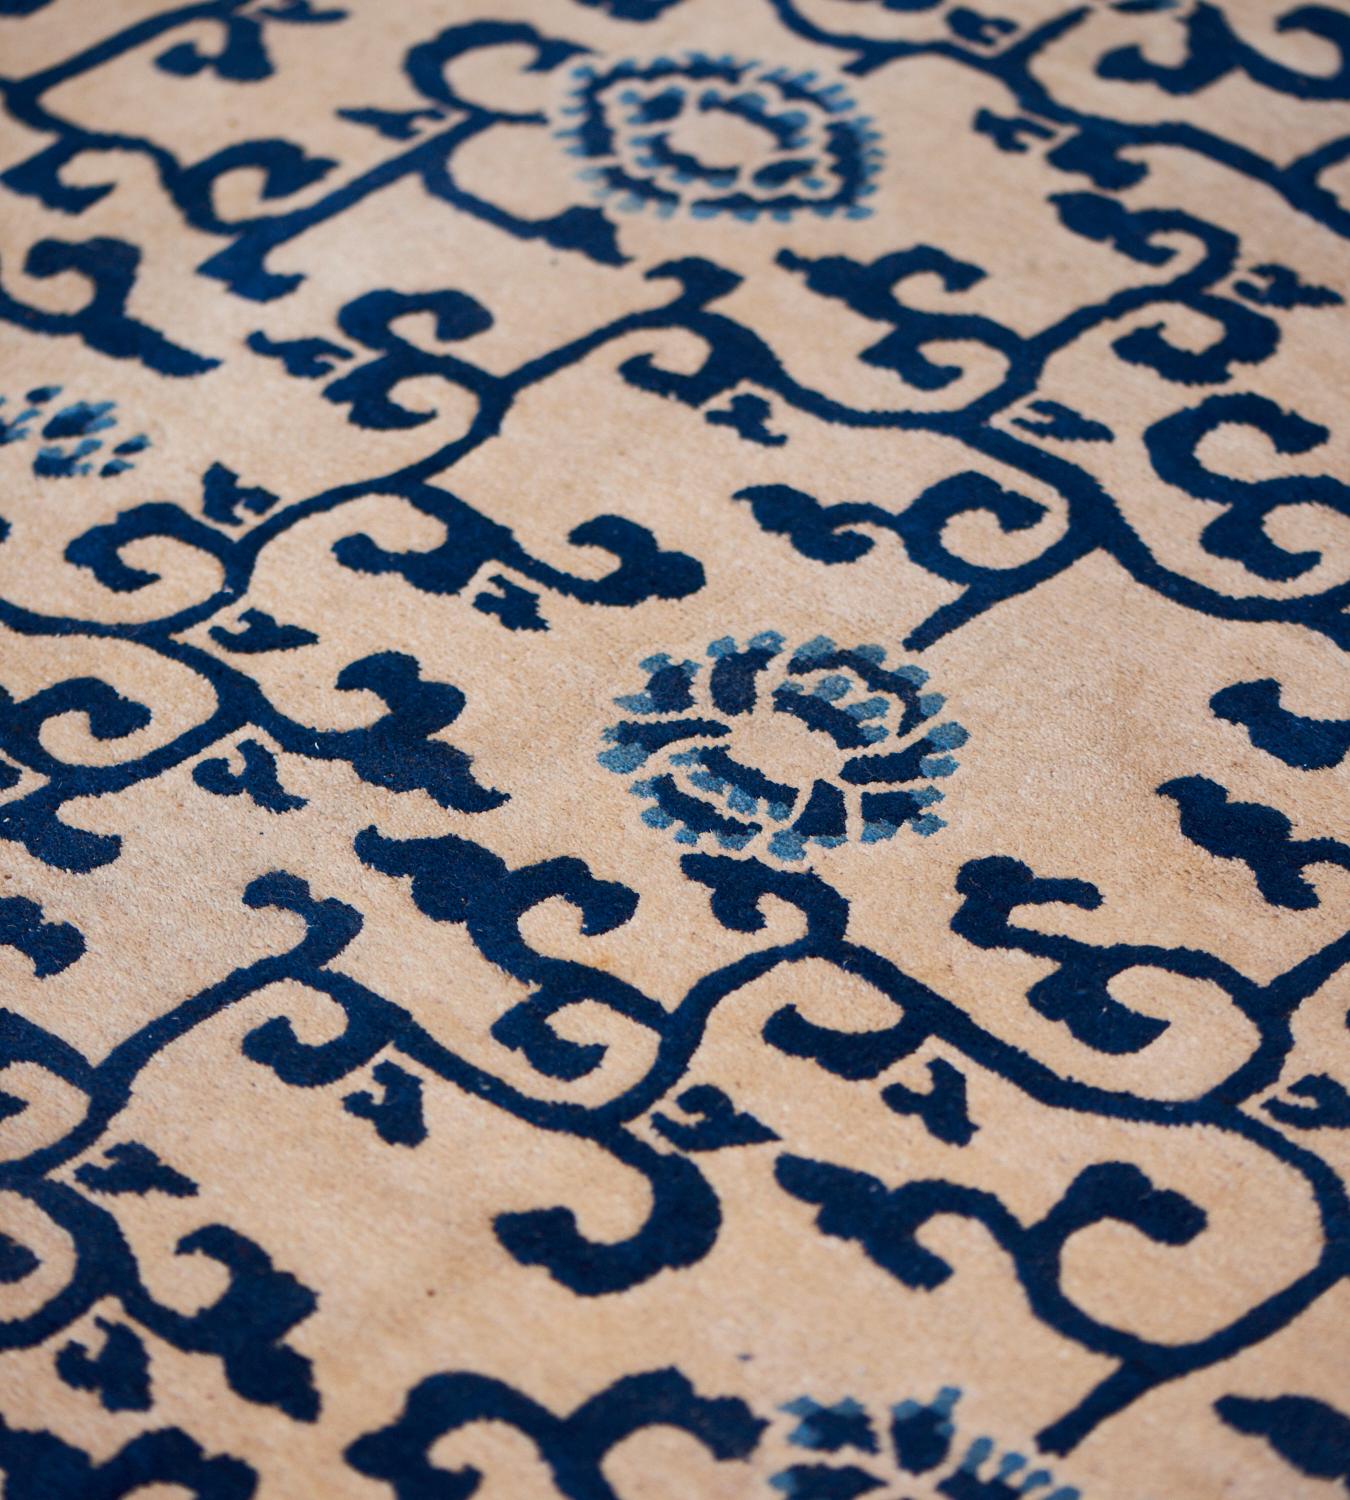 This antique, circa 1900, Chinese Peking rug has an ivory field with an overall design of indigo-blue angular scrolling vine issuing light blue and indigo-blue flowerheads, in an ivory and indigo-blue interlocking lattice-weave border, inner ivory